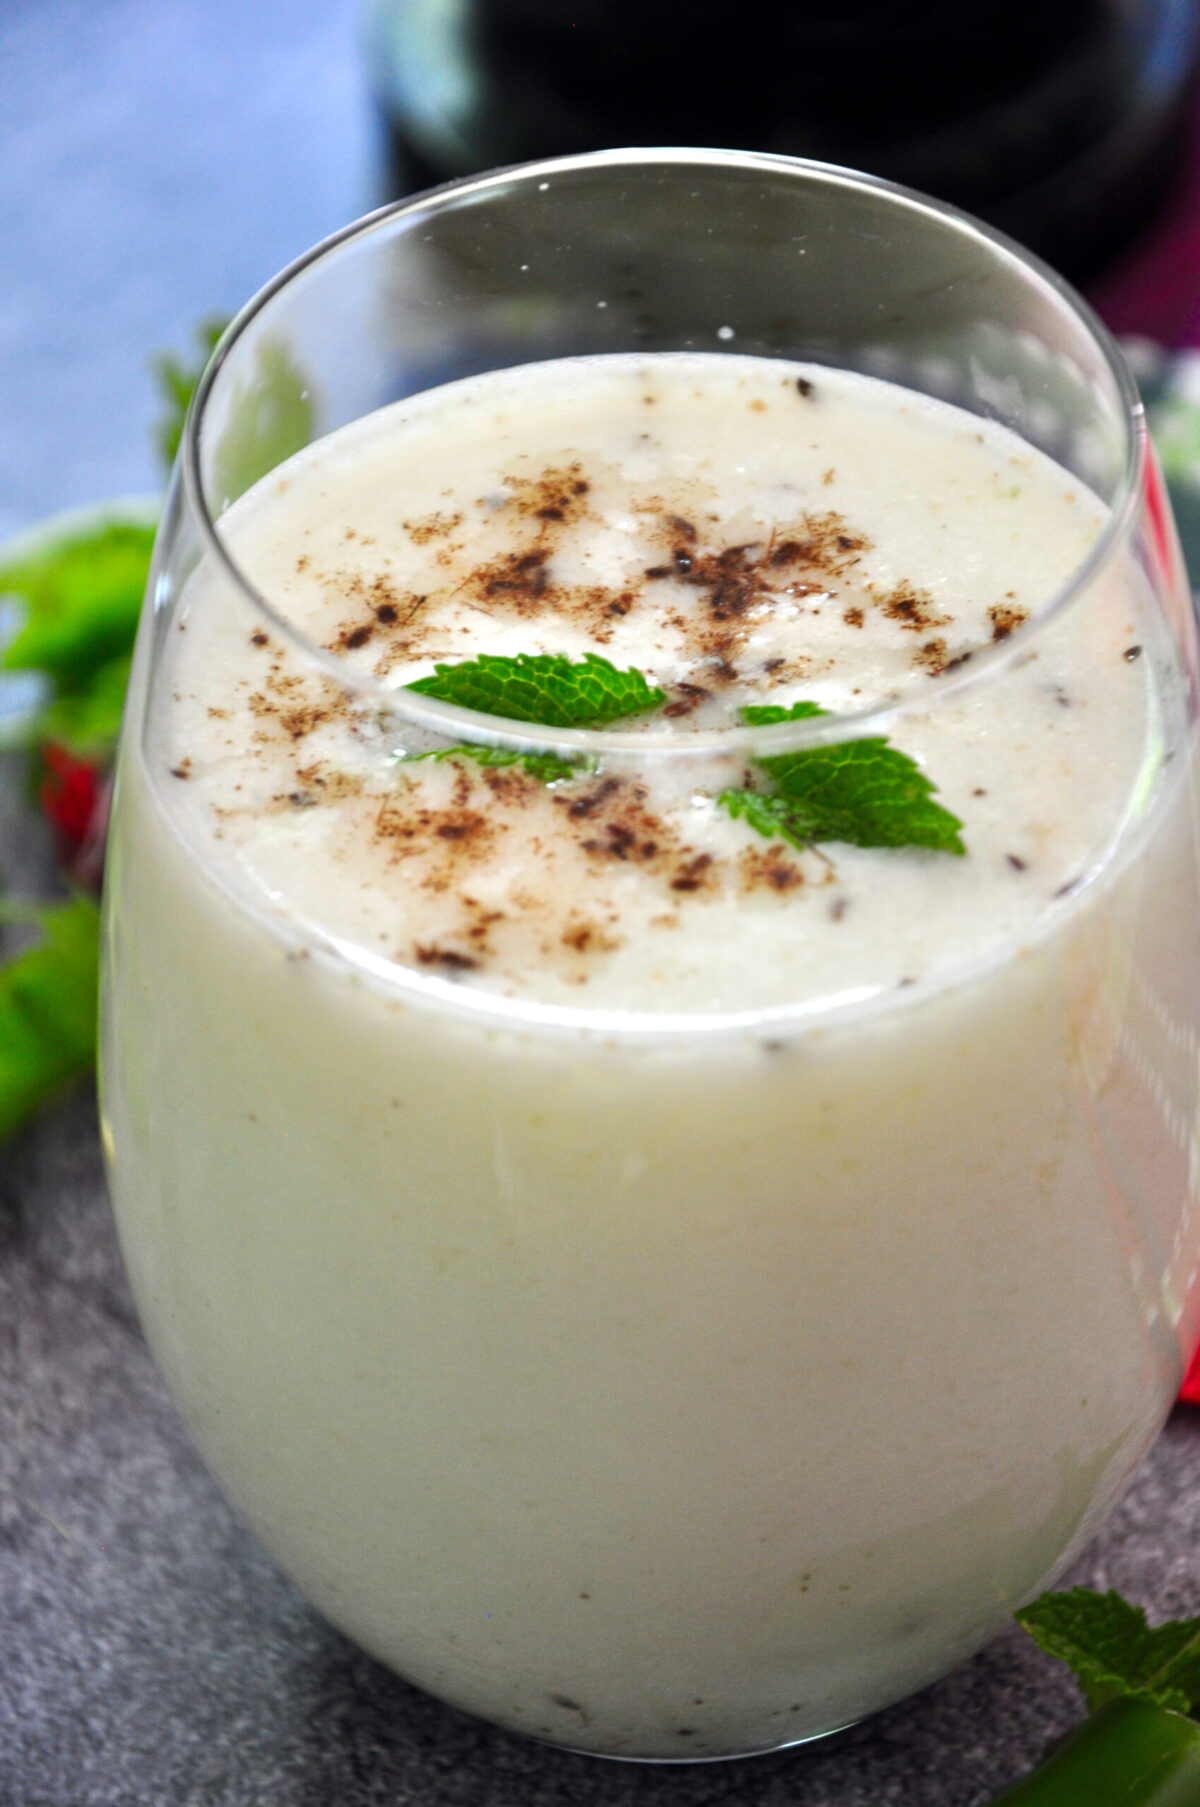 buttermilk in a glass and garnished with roasted cumin powder and mint leaves